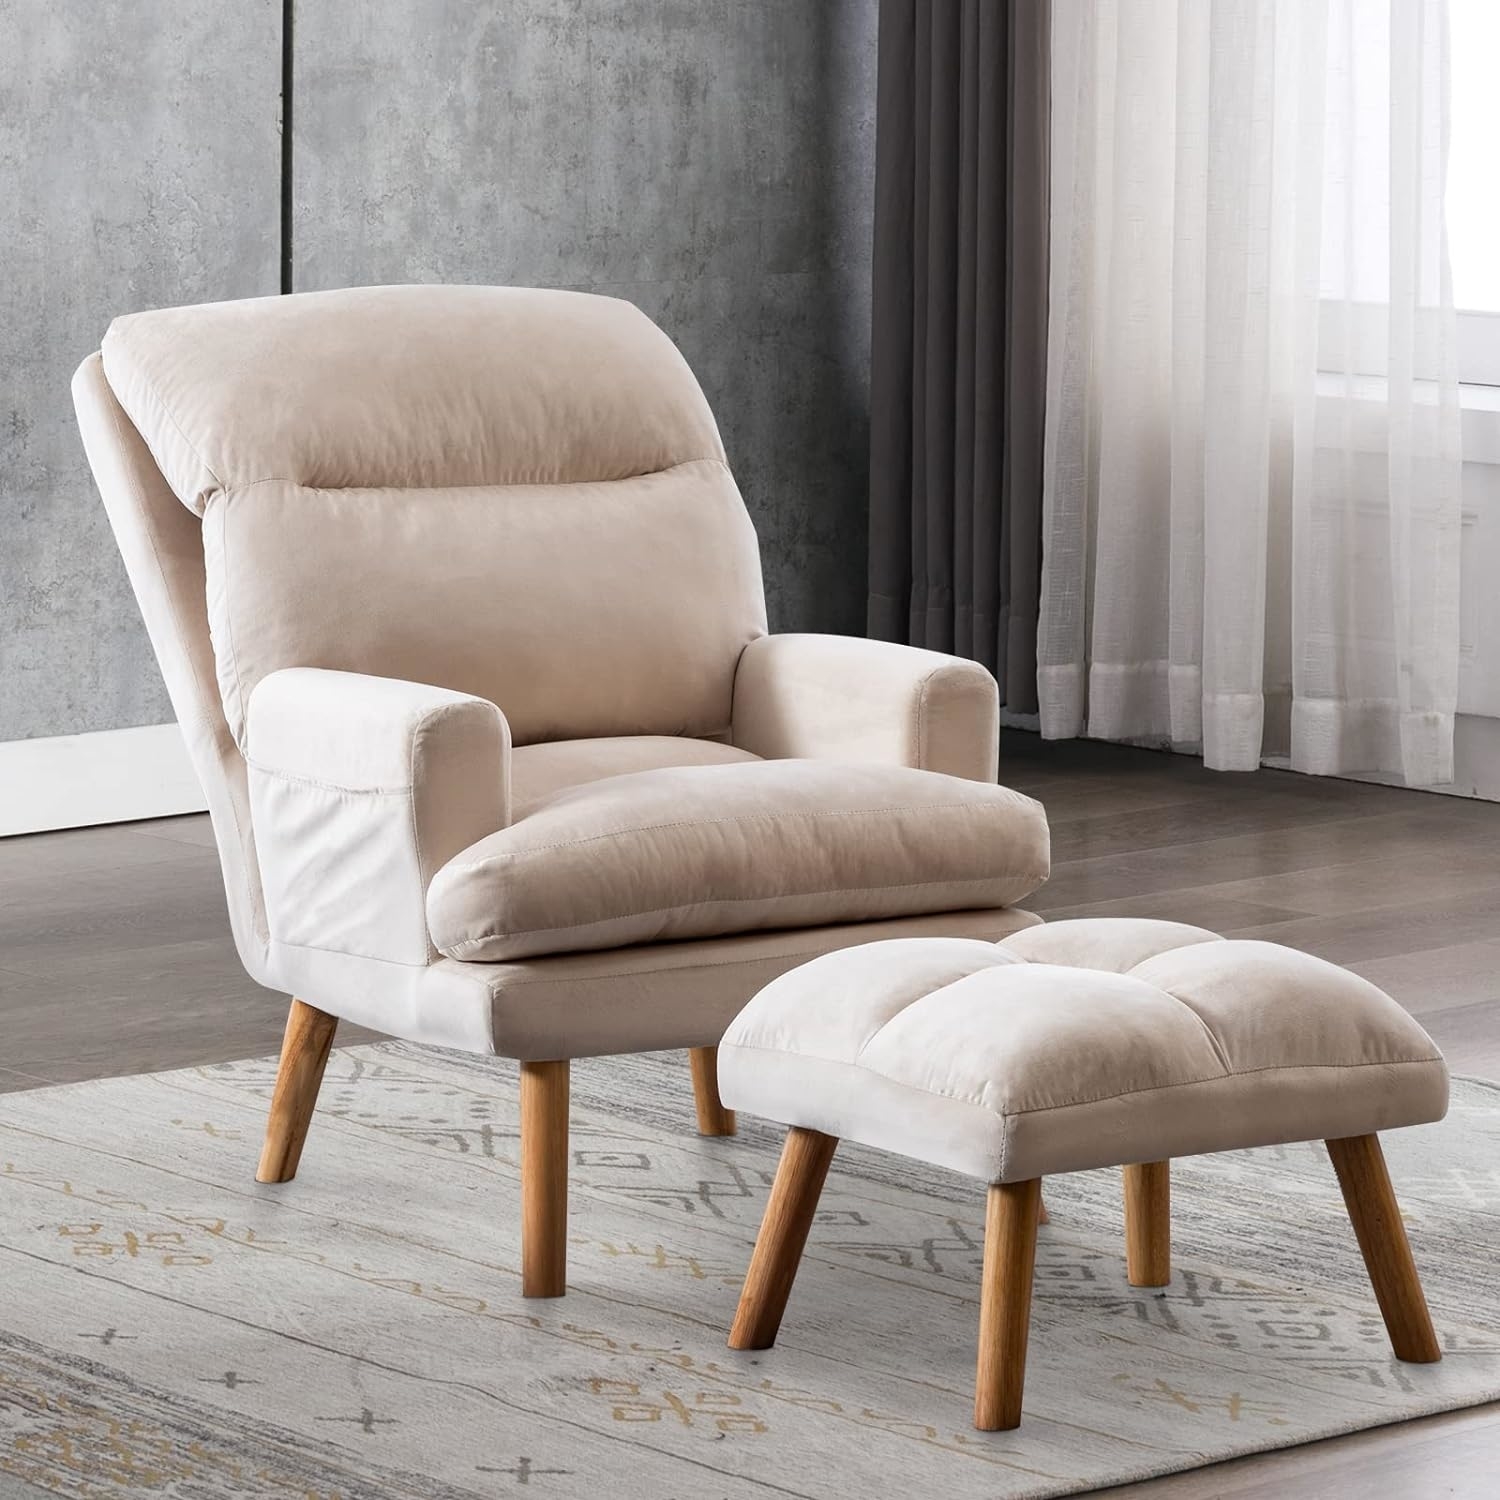 Armchair with matching ottoman in a modern living room setting for shopping